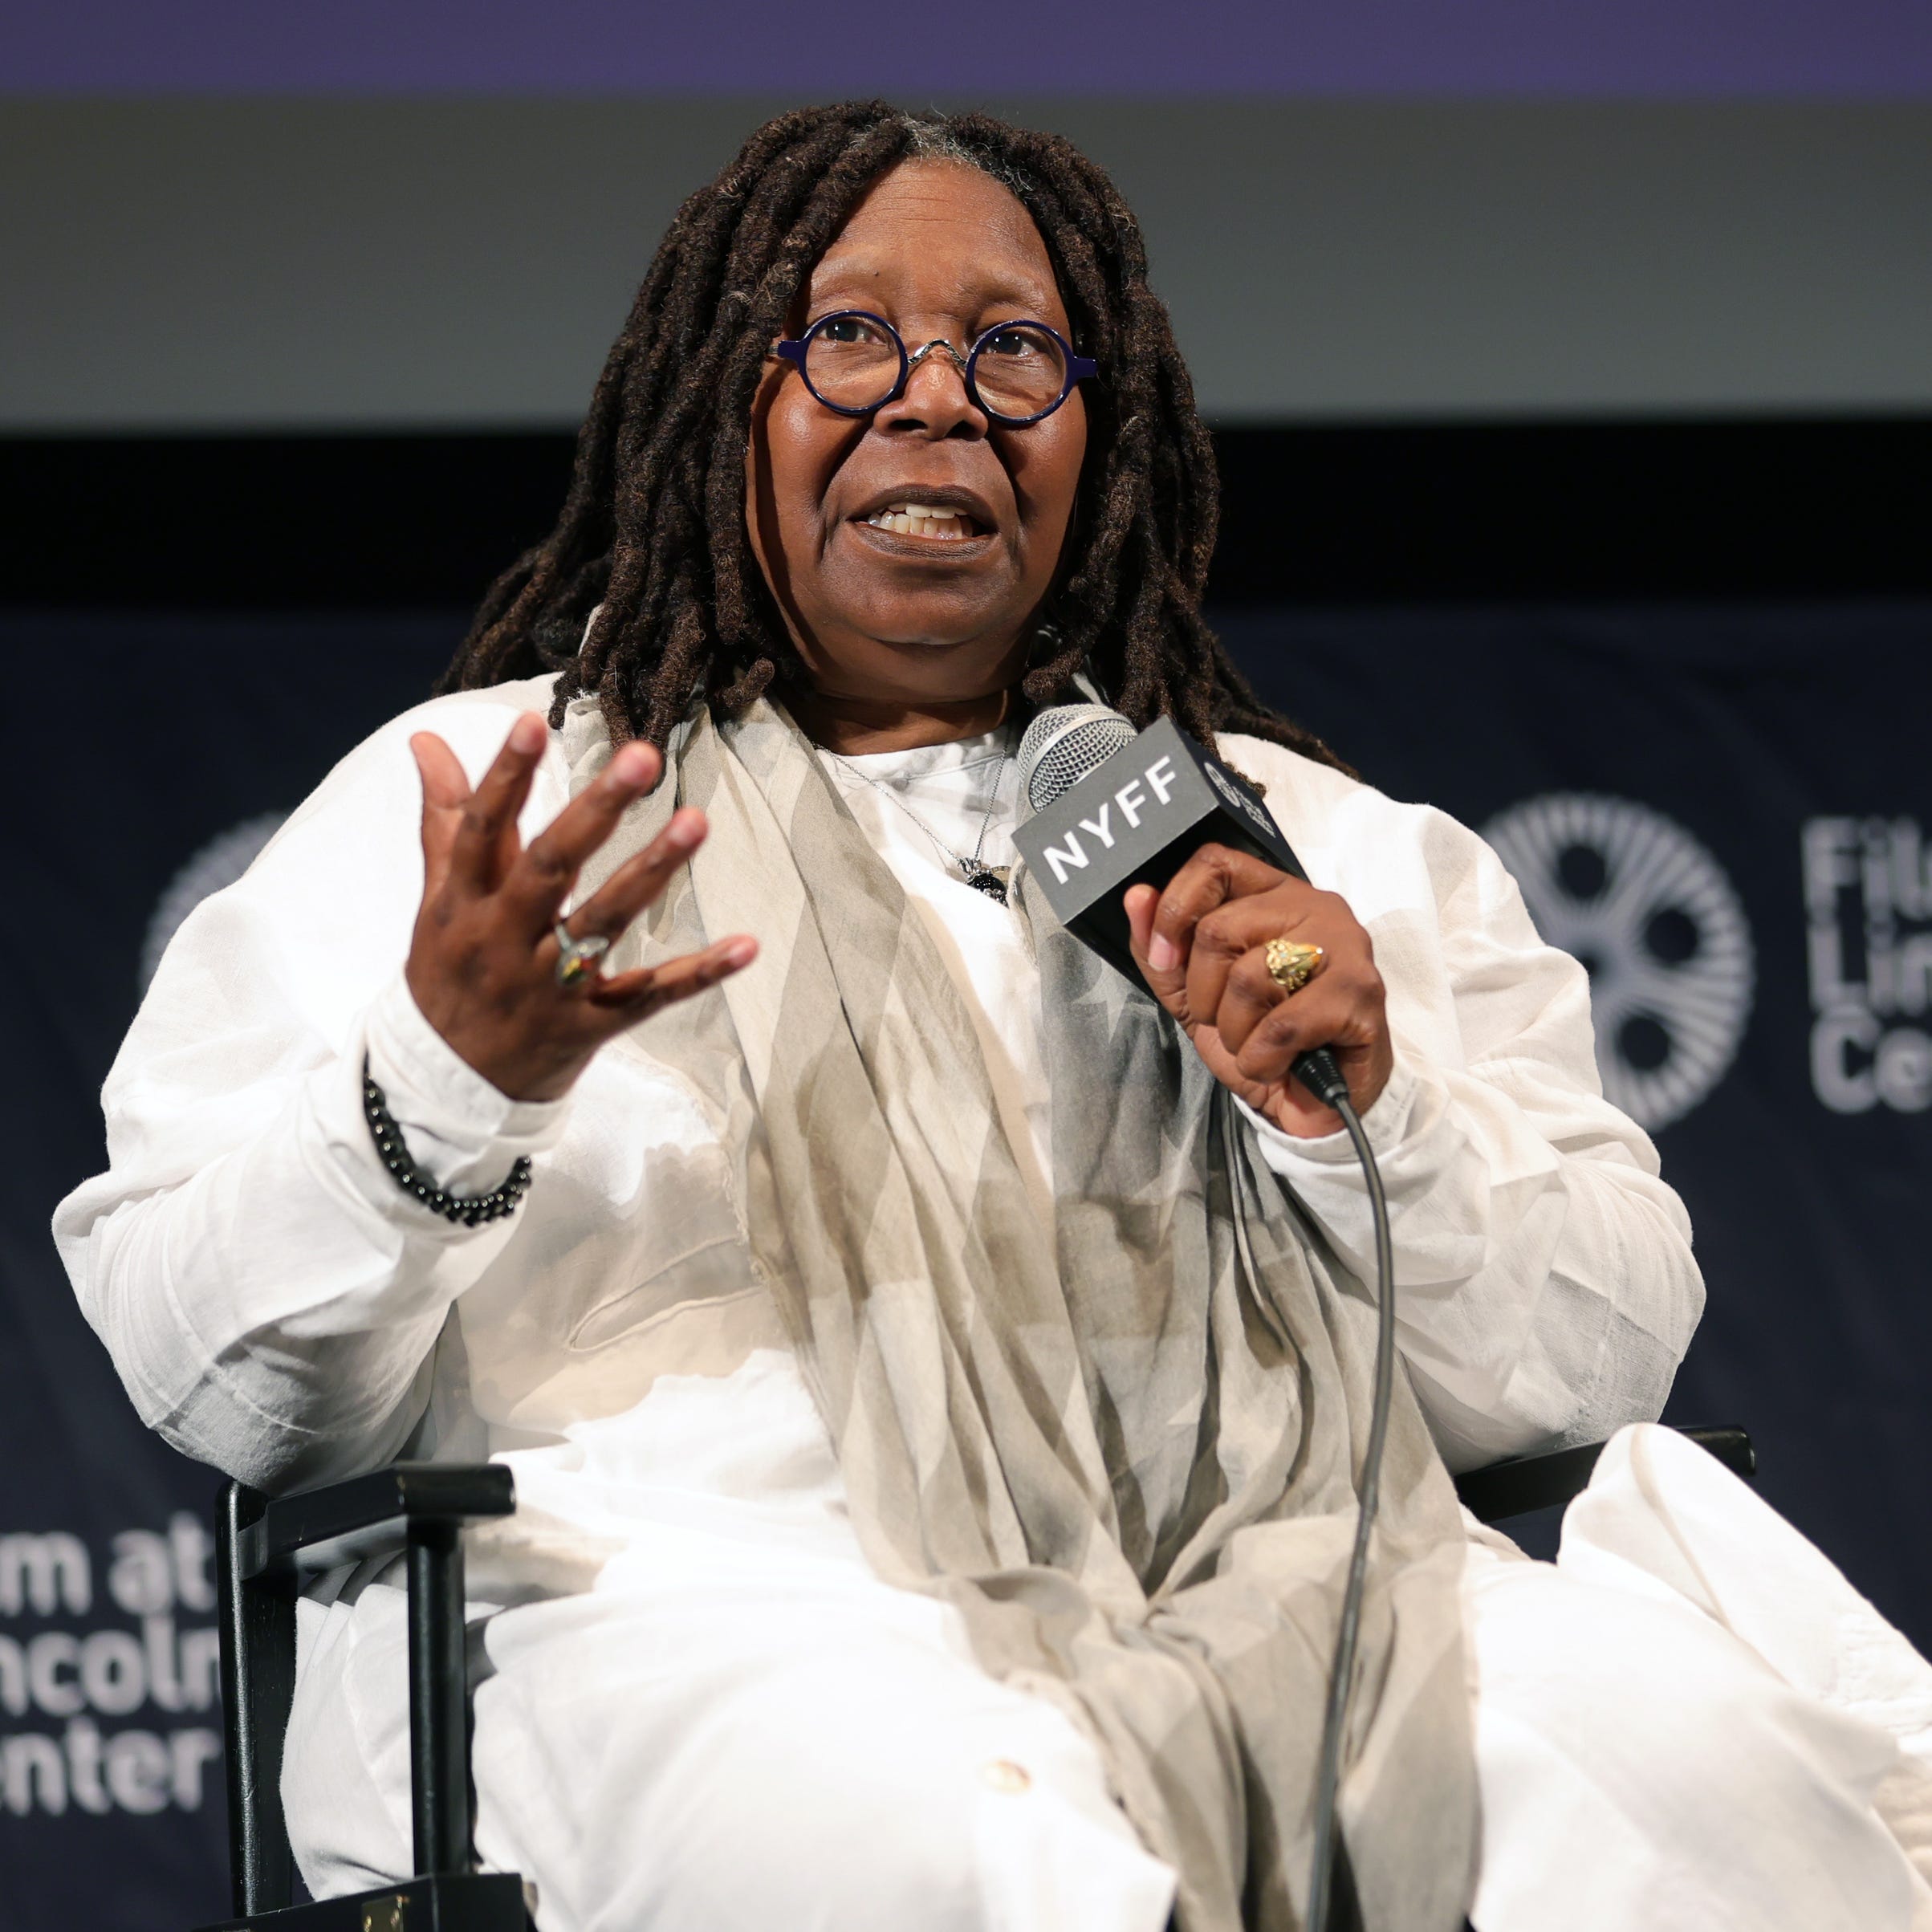 NEW YORK, NEW YORK - OCTOBER 01:  Whoopi Goldberg takes part in the  "Till" press conference at The Film Society of Lincoln Center, Walter Reade Theatre on October 01, 2022 in New York City. (Photo by Michael Loccisano/Getty Images for FLC) ORG XMIT: 775878906 ORIG FILE ID: 1429421439